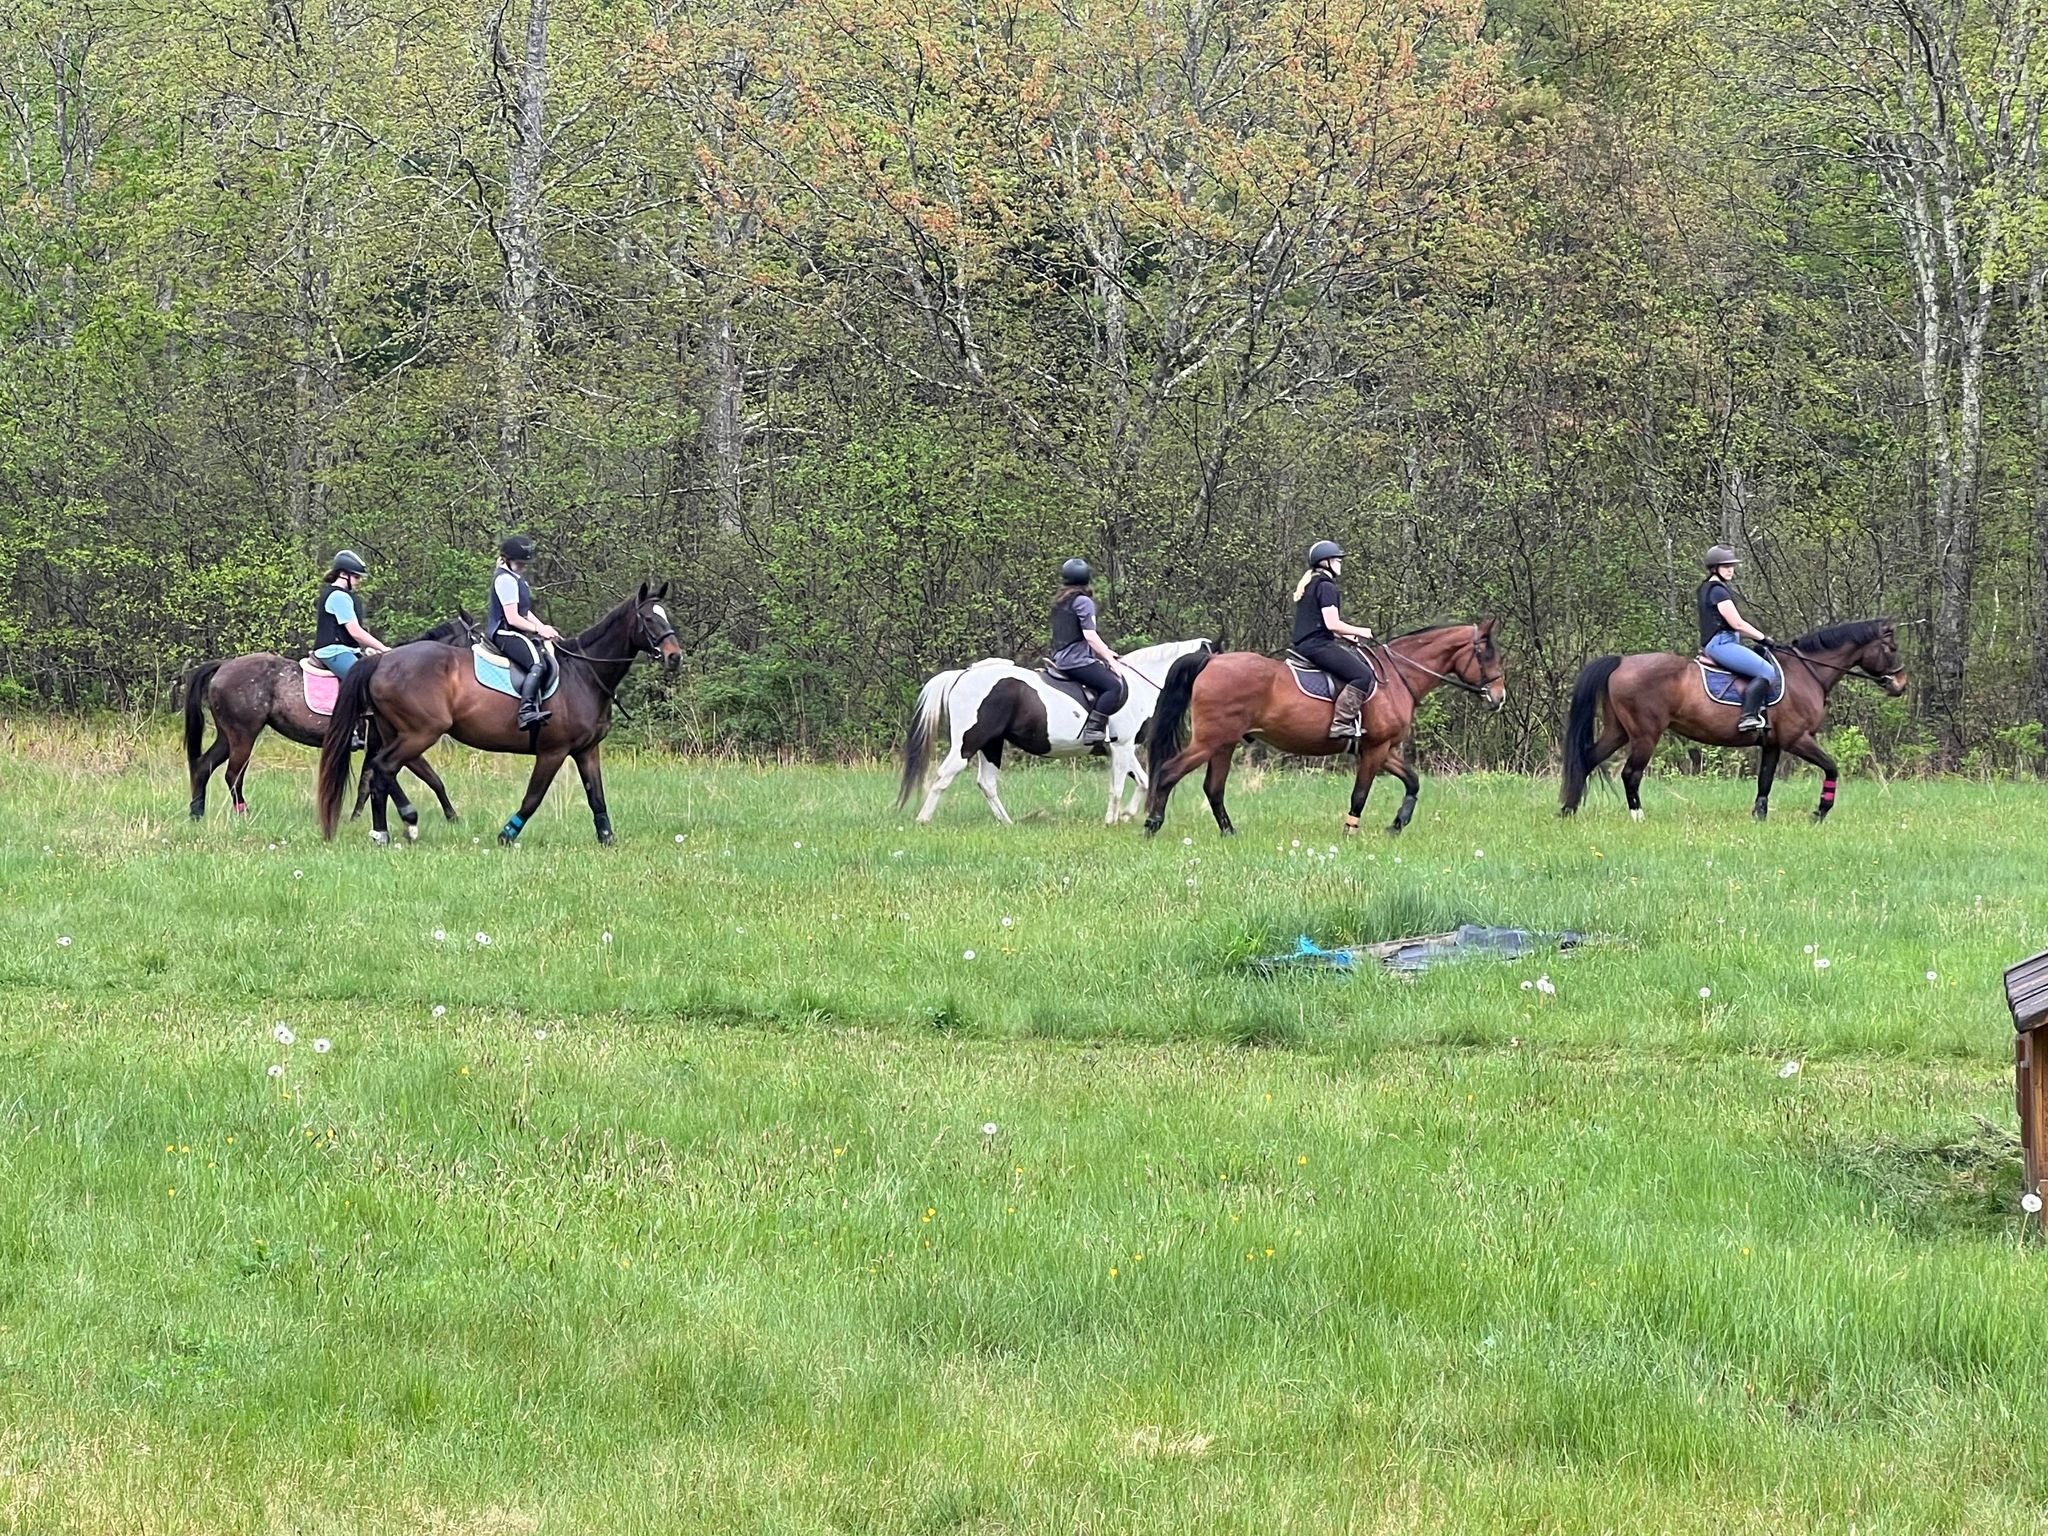 group of 5 horses with riders